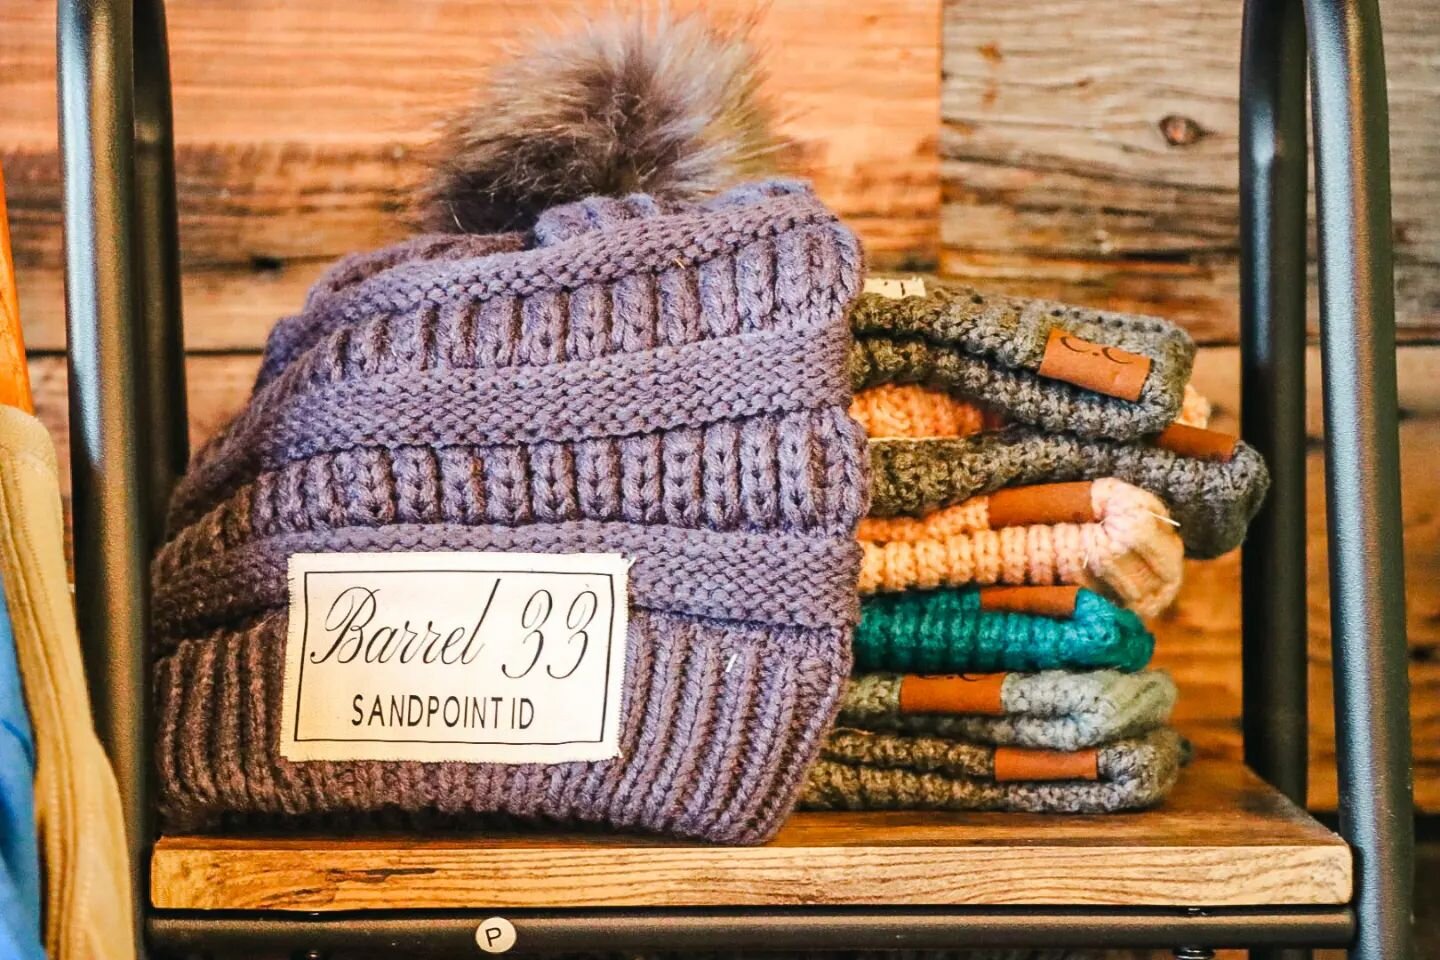 It's Monday. It's chilly out, and we open at 10am for you. Sit back and watch the snow fall with us!

Also, we have these cute beanies, they make the perfect gift for yourself or your wine loving friends.